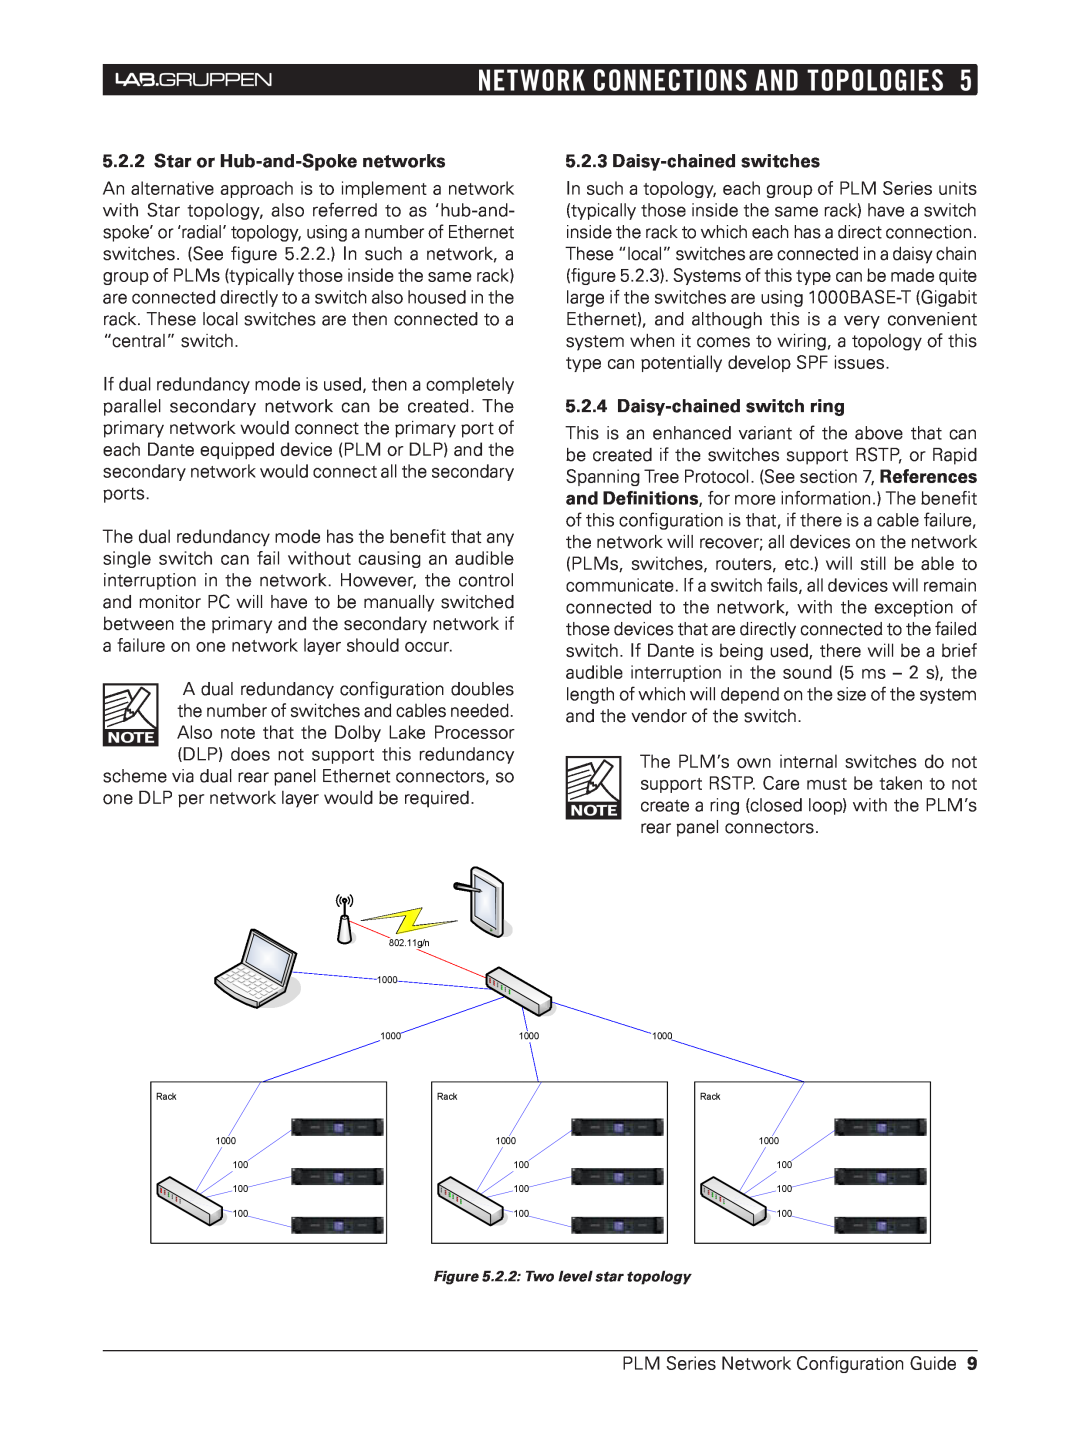 3Com NCG-PLM, PLM Series manual Network Connections and Topologies, Star or Hub-and-Spokenetworks, Daisy-chainedswitches 